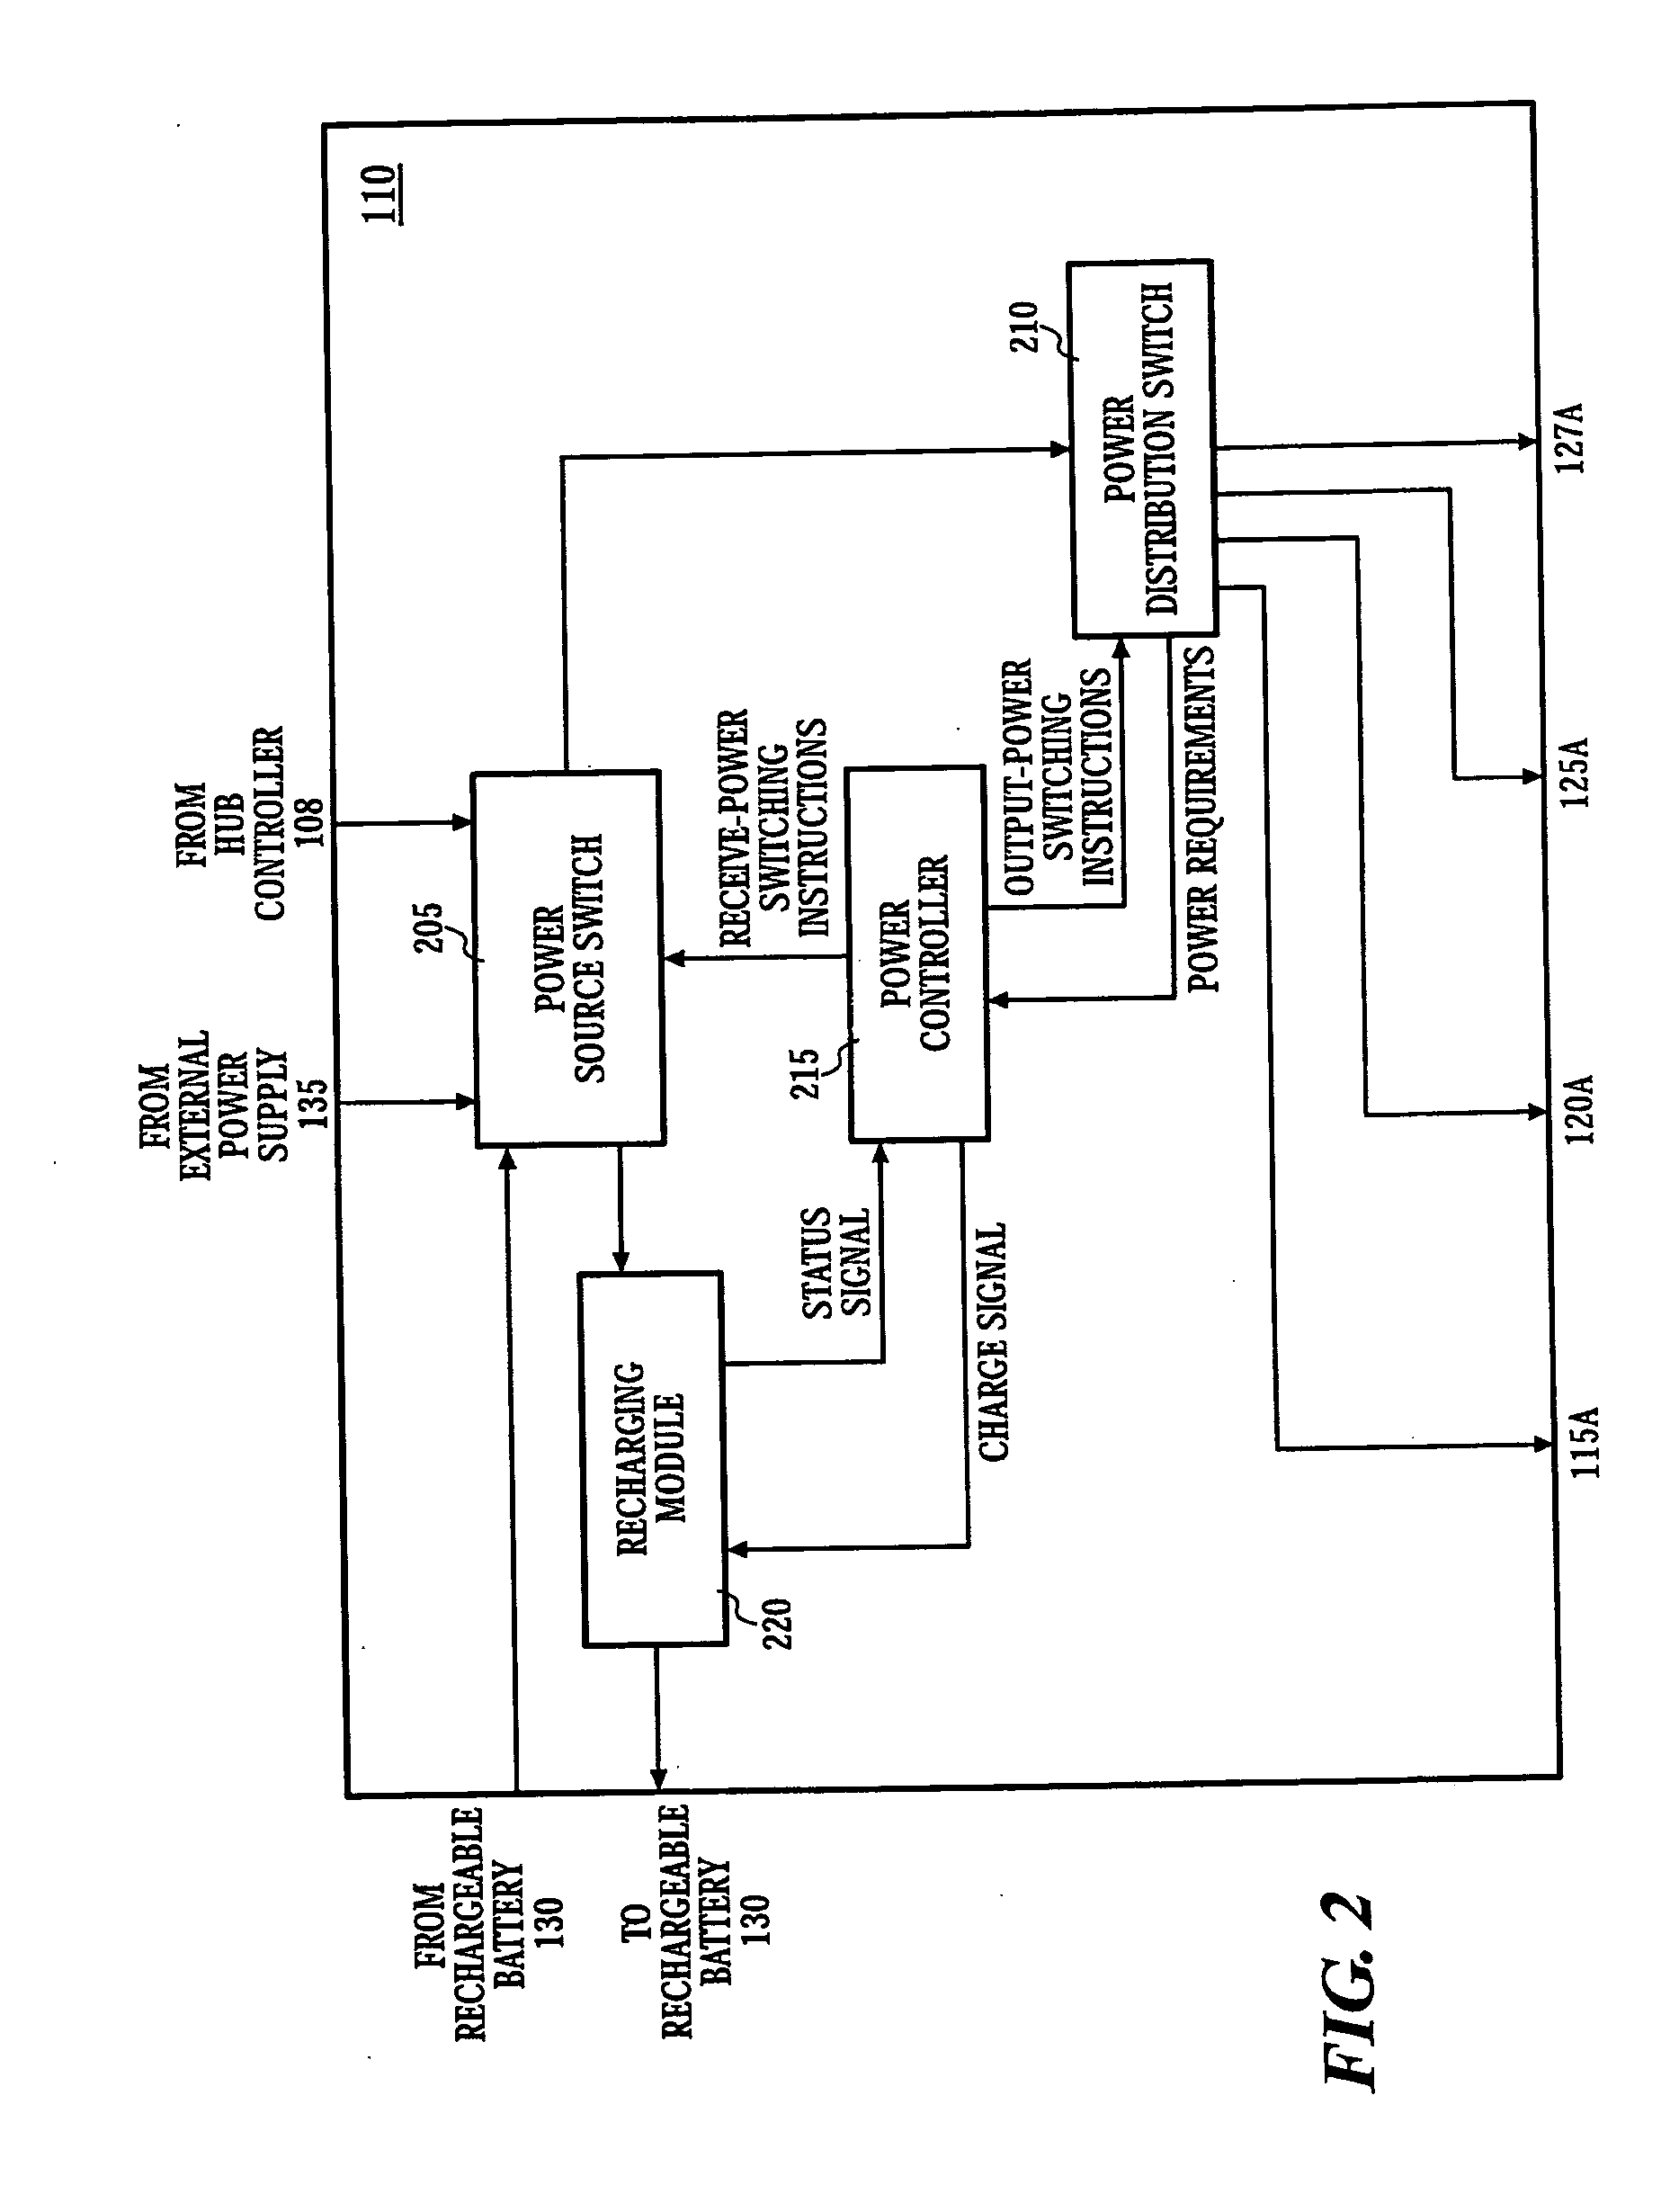 Method and apparatus for a communication hub